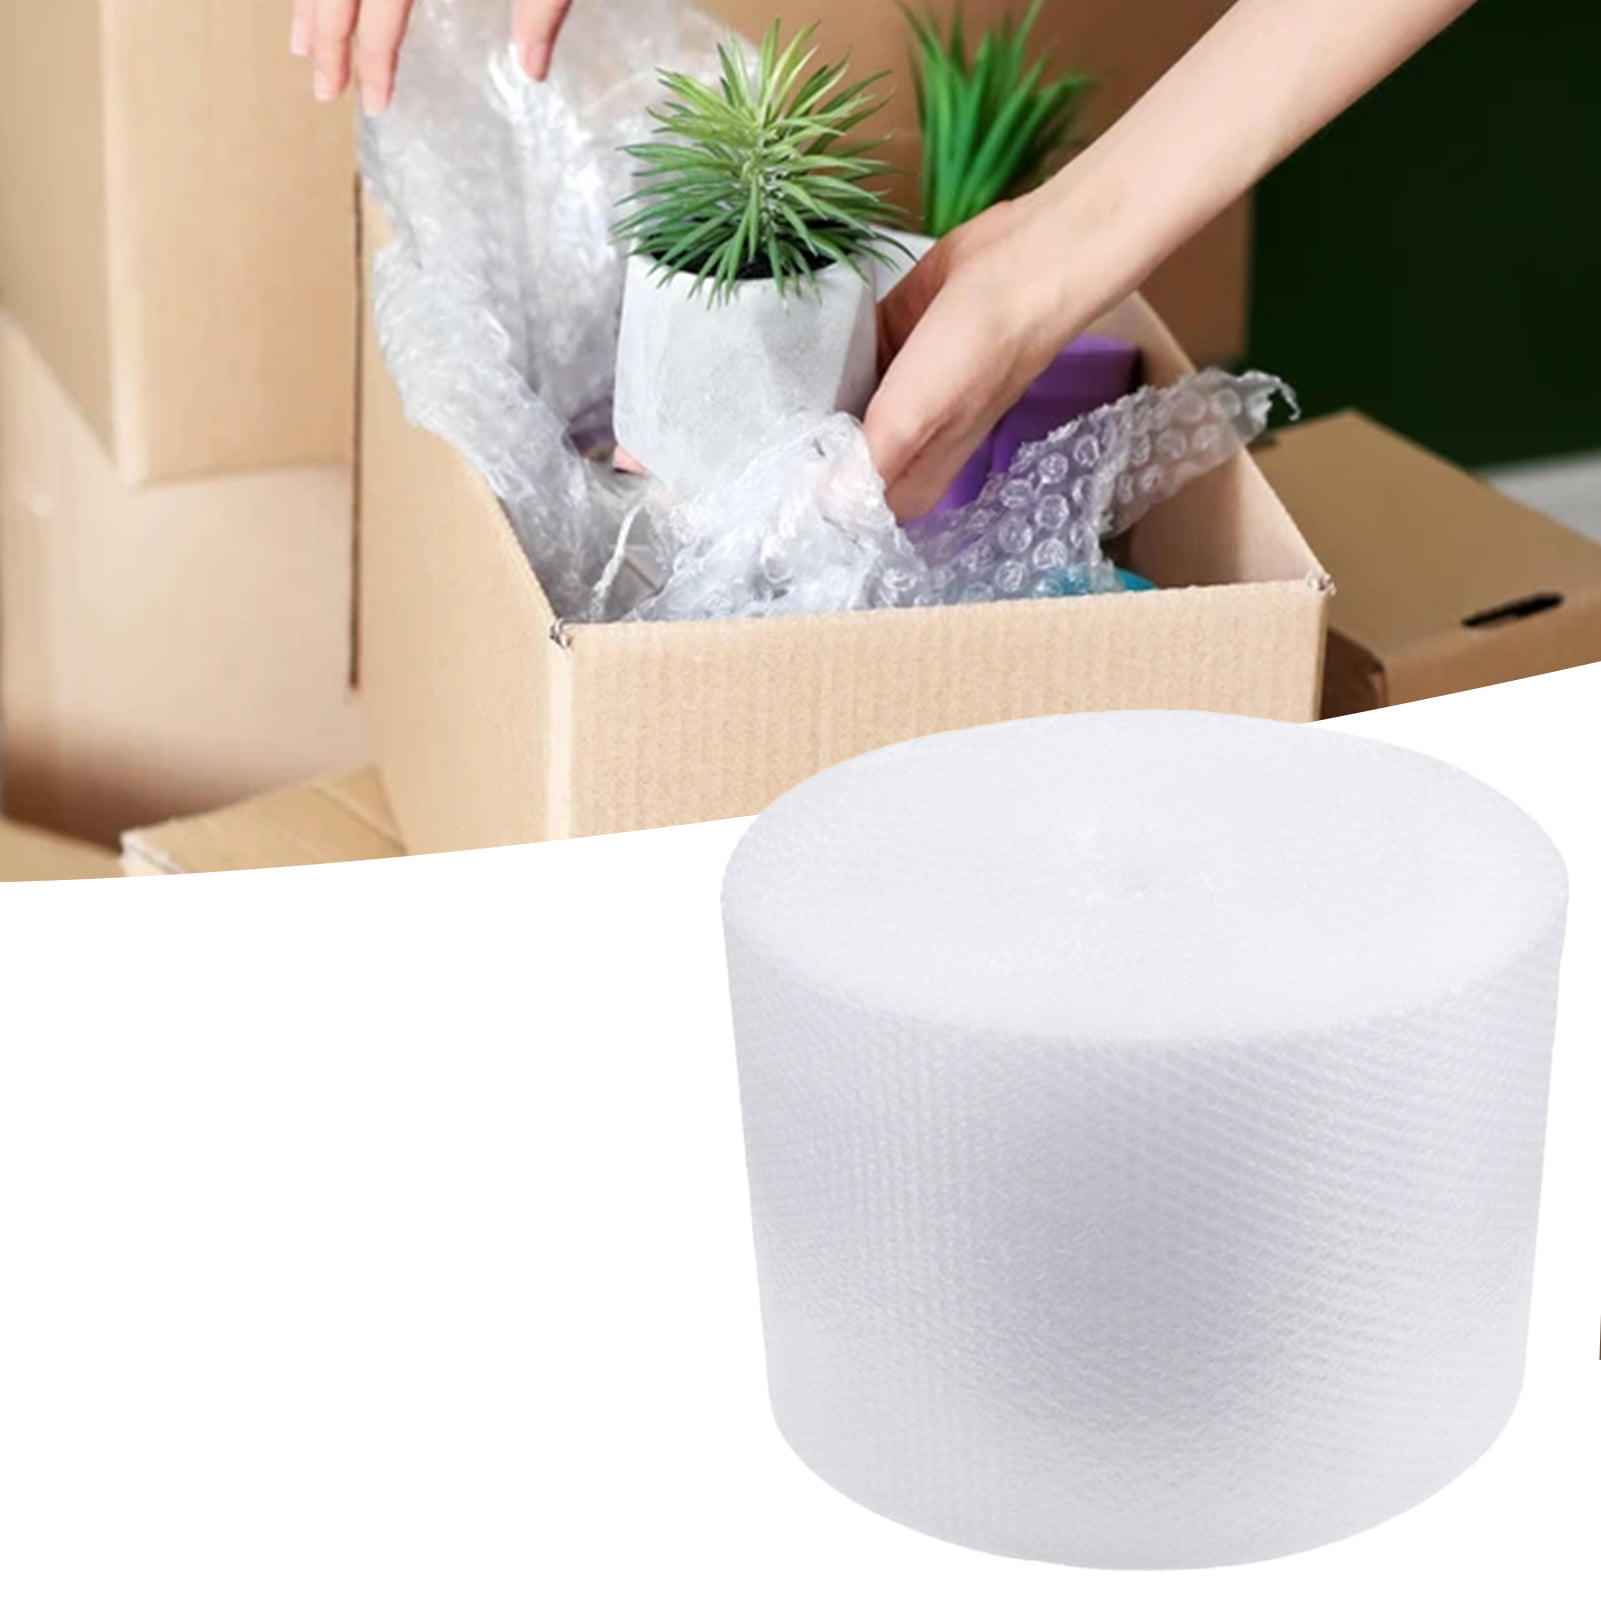 Eco Friendly Cushioning Stuffer for Shipping and Packaging Great Packing Supplies Alternative to Peanuts and Paper. Innovative Haus 320 Count 4x8 Air Pillows for Filling Void in Package Foam 